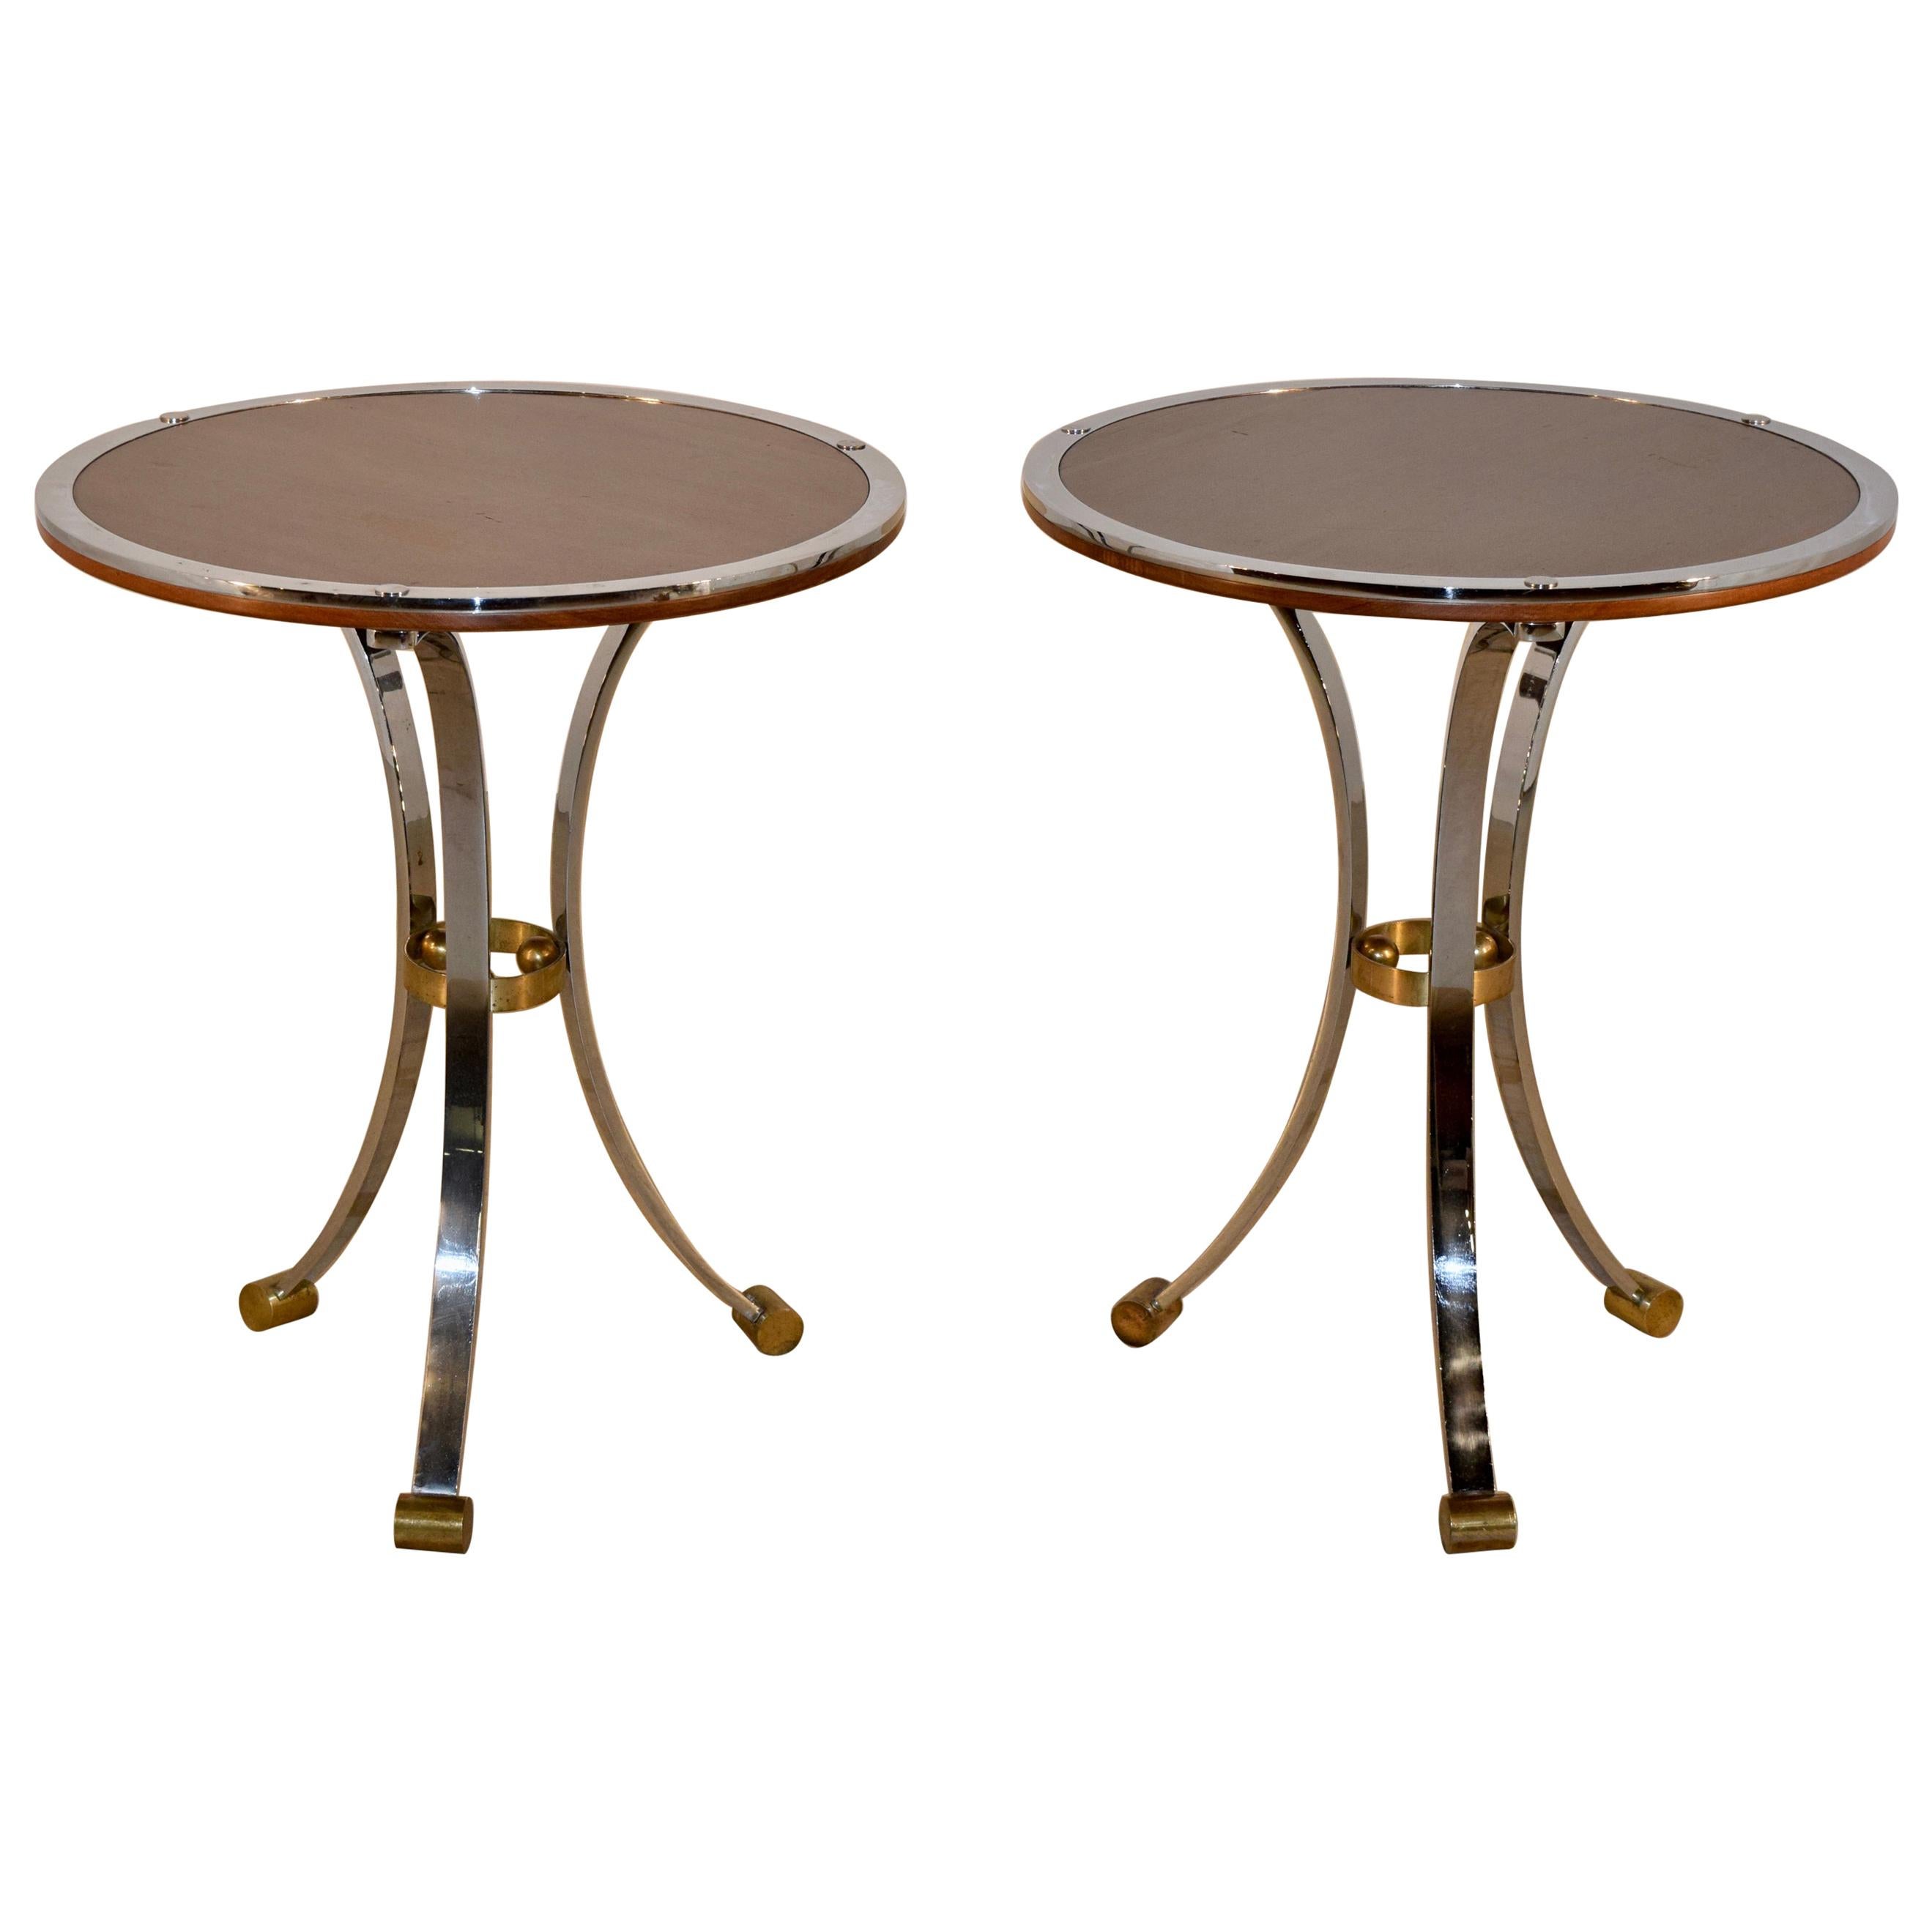 Pair of Midcentury Mahogany and Chrome Side Tables